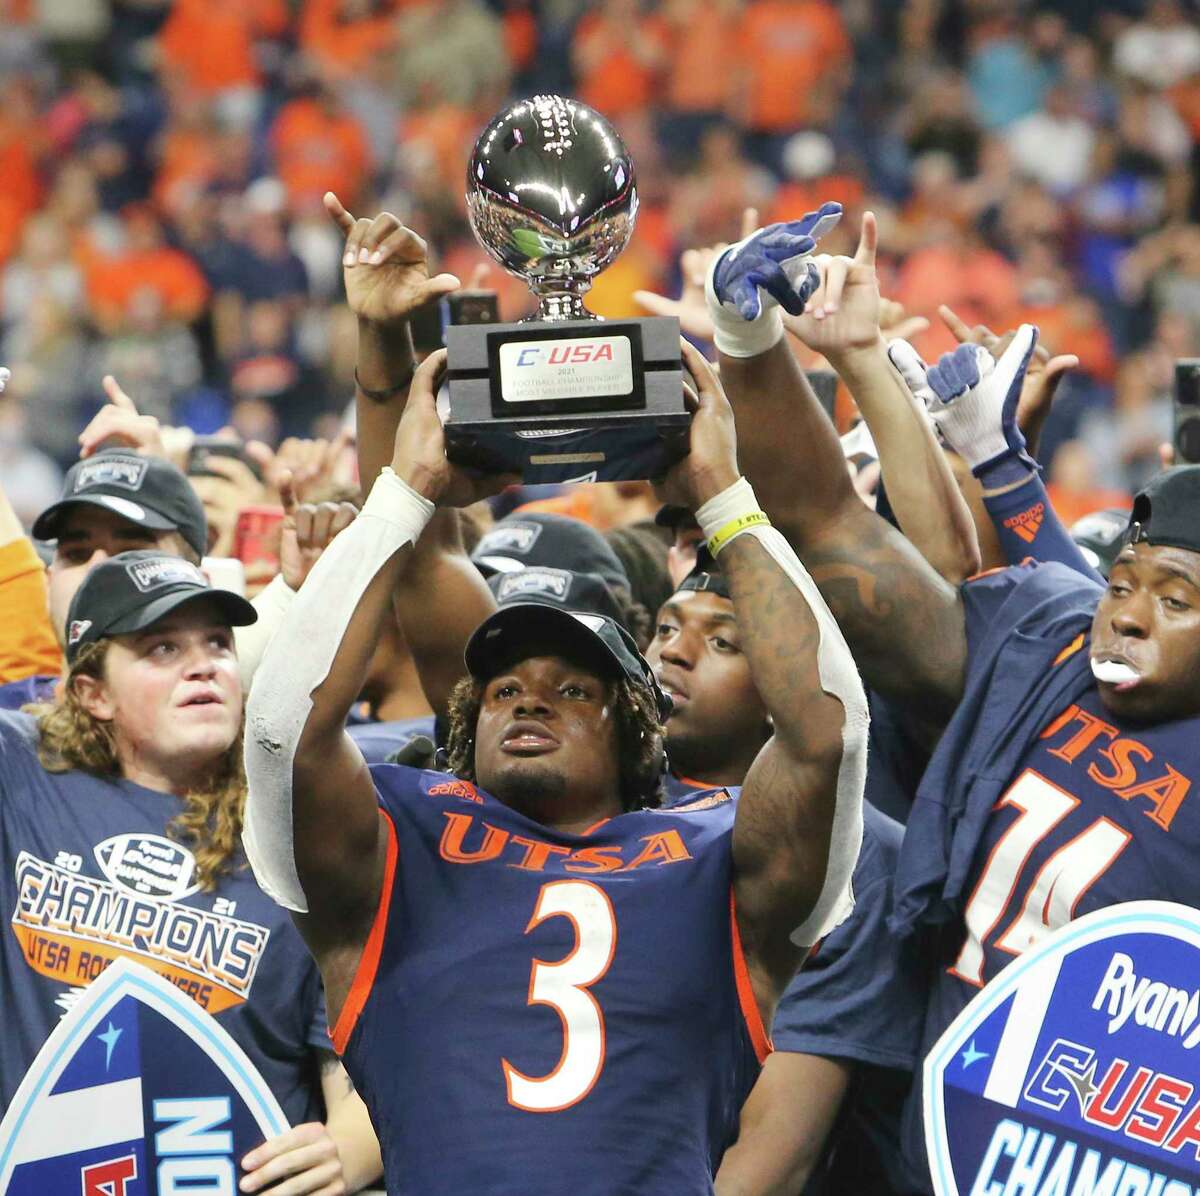 UTSA's running back Sincere McCormick (03) earns the most valuable player trophy after UTSA defeats Western Kentucky in the 2021 Conference USA Championship football game at the Alamodome on Friday, Dec. 3, 2021. The Roadrunners defeated the Hilltoppers, 49-41, to win the championship.